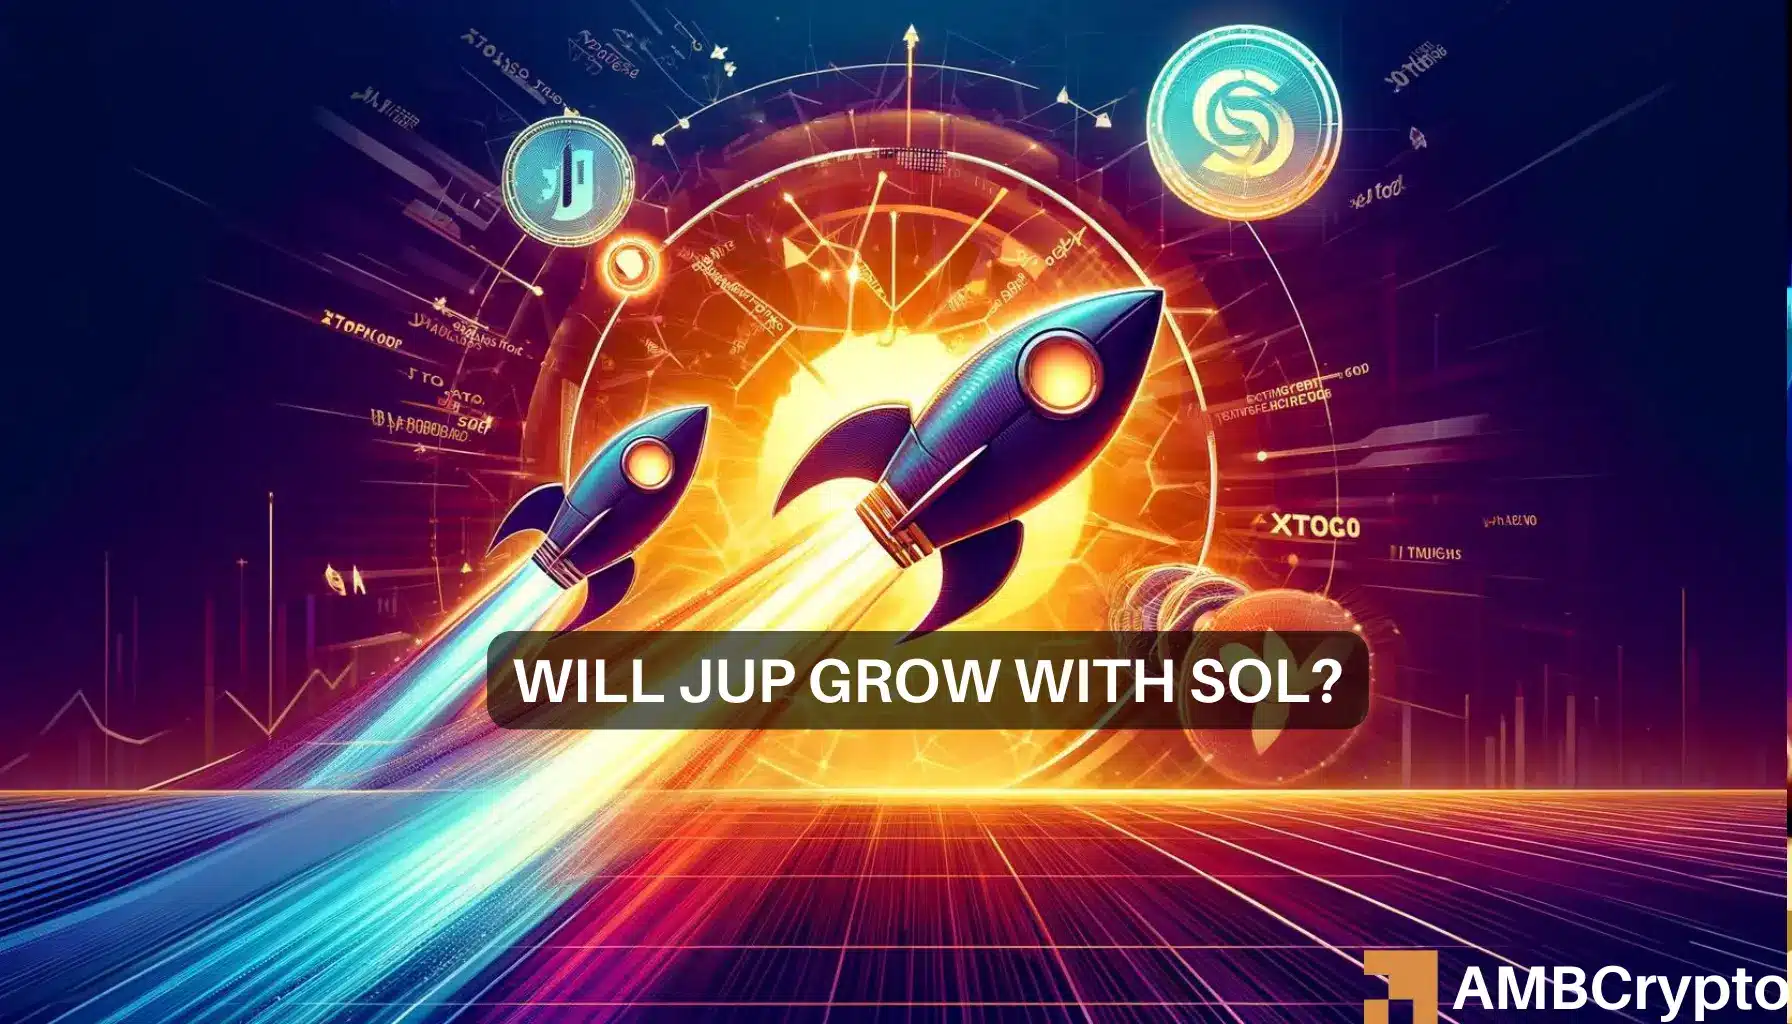 Solana-based tokens JUP and JTO hit key milestones: What about SOL?